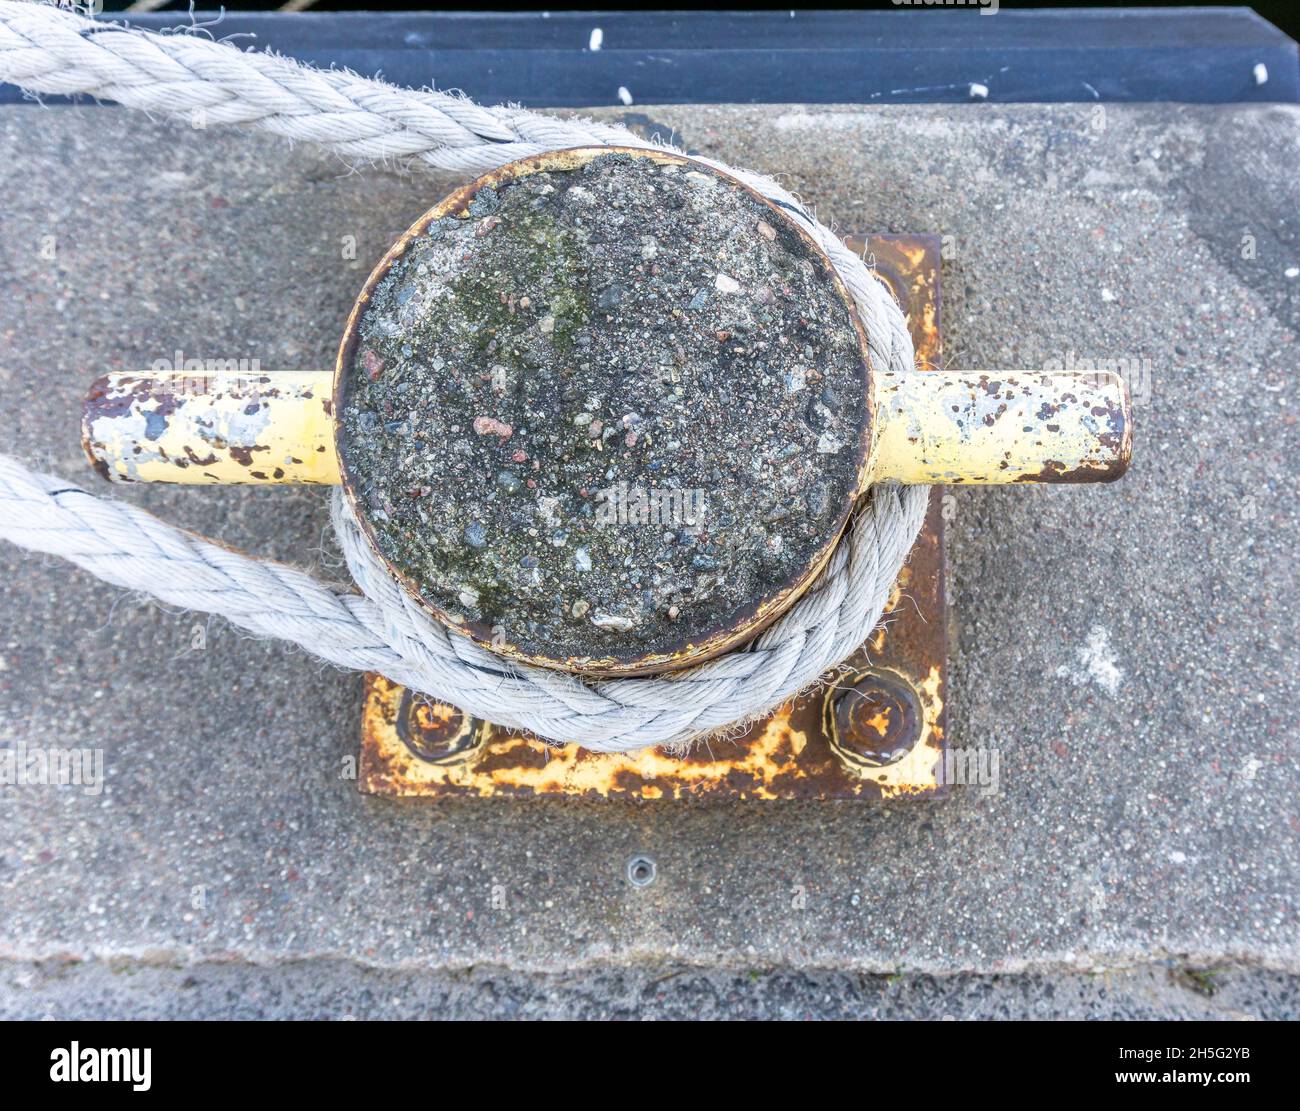 Stockholm, Sweden - April 17, 2021: A view from above on mooring rope around iron bollard Stock Photo